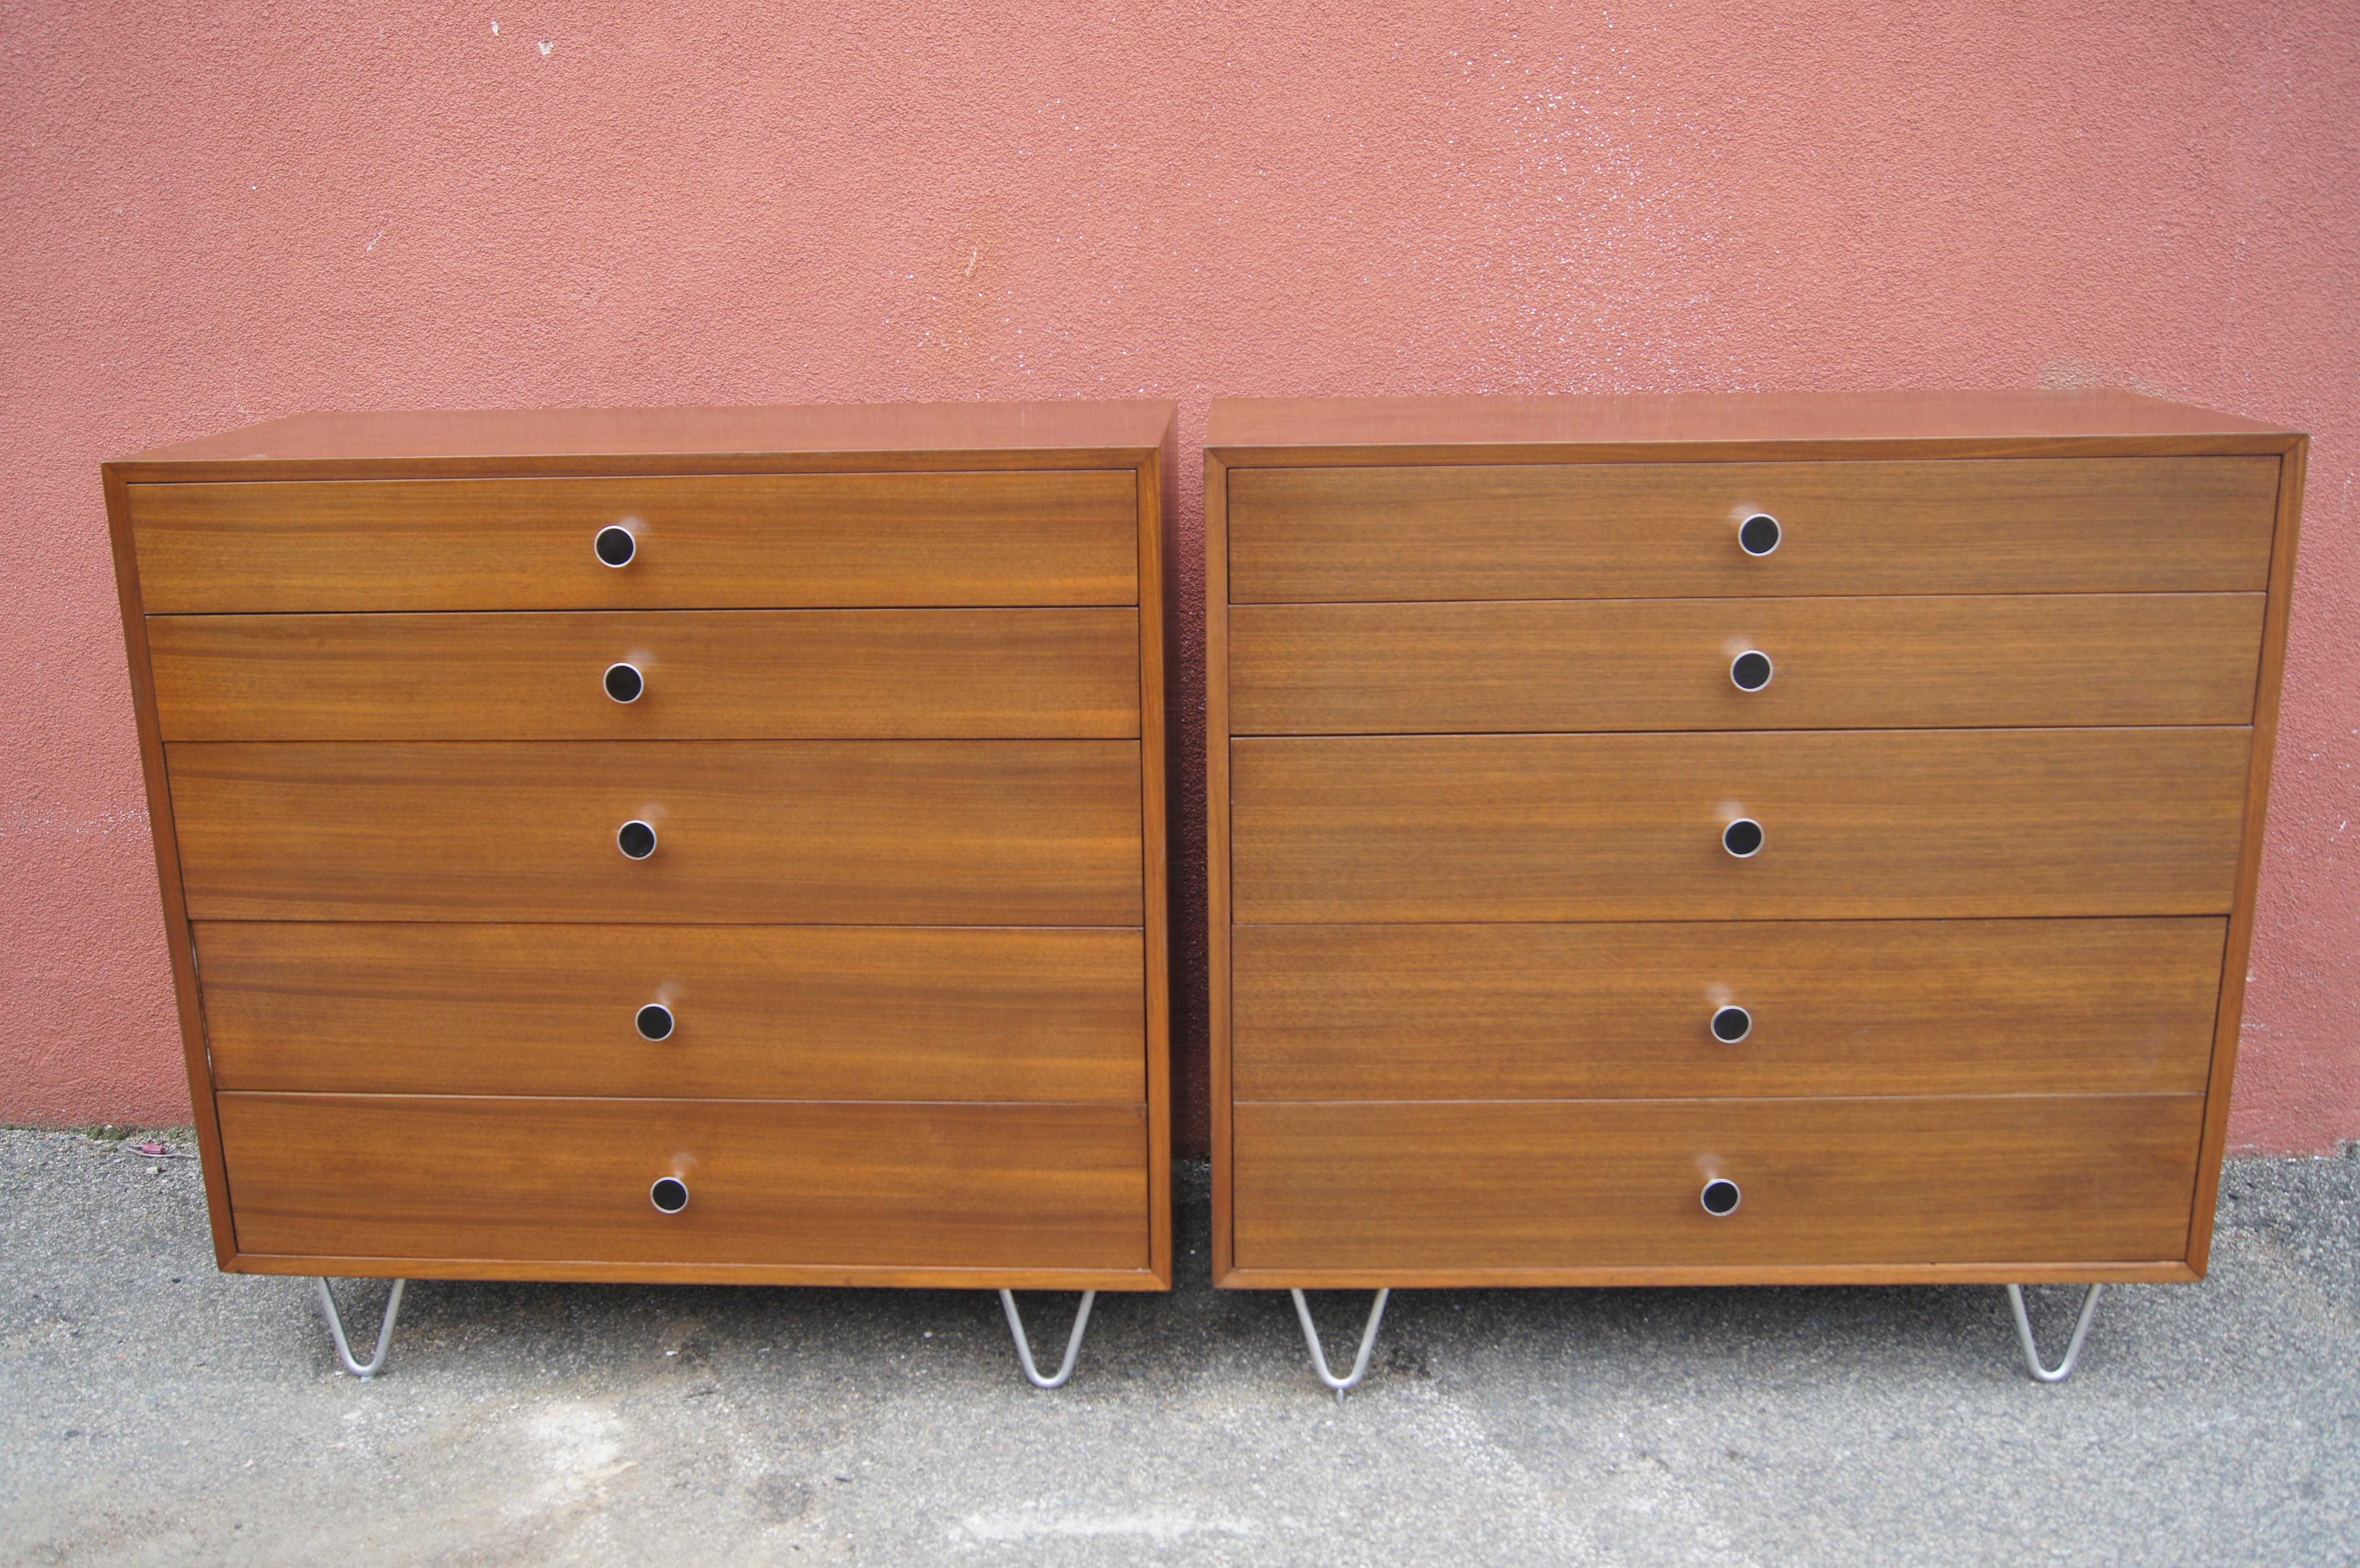 This pair of walnut dressers, modeled after the designs of George Nelson for Herman Miller, were produced by Highlands Woodcraft of Massachusetts in the 1950s. Each dresser has five drawers: three deep drawers, one of which is divided into four